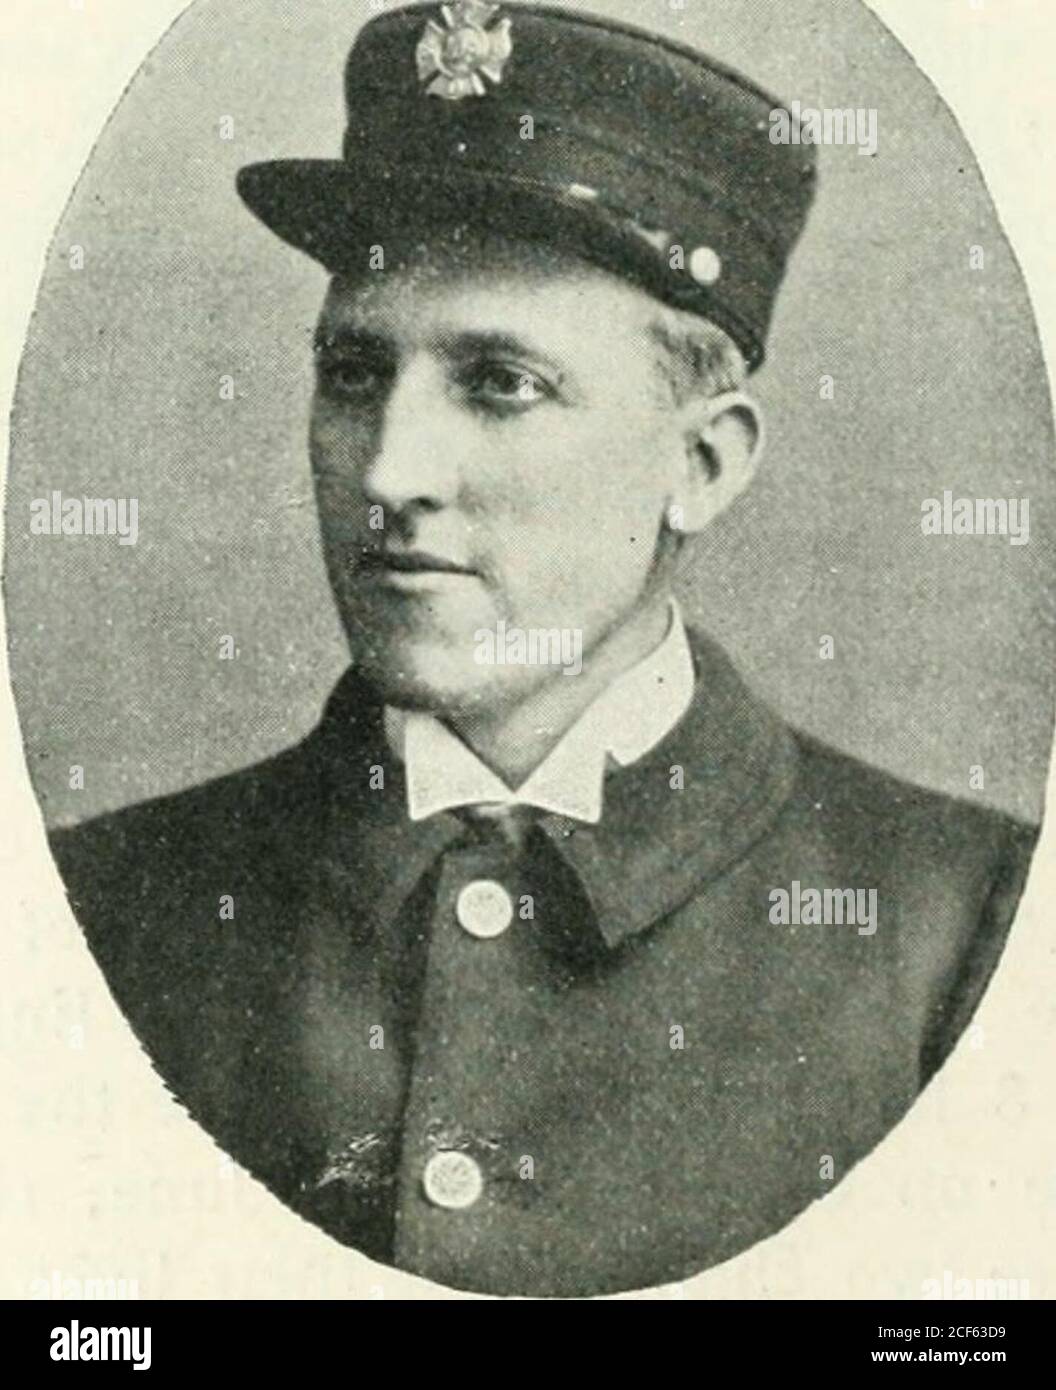 . The Exempt firemen of San Francisco; their unique and gallant record. DANIEL J. COUGHLIN EDWARD COLLIGAN Daniel J. Coughlin hoseman of Engine Edward Colligan, Engineer of EngineCompany No. 8 was born in San Fran- Company No. 8, was born in San Fran-cisco January i, 1862. He joined the cisco September 30, 1867. He joinedDepartment September 11, 1888. the Department April 7, 1894. SAN FRANCISCO FIREMEN iy5 Stock Photo